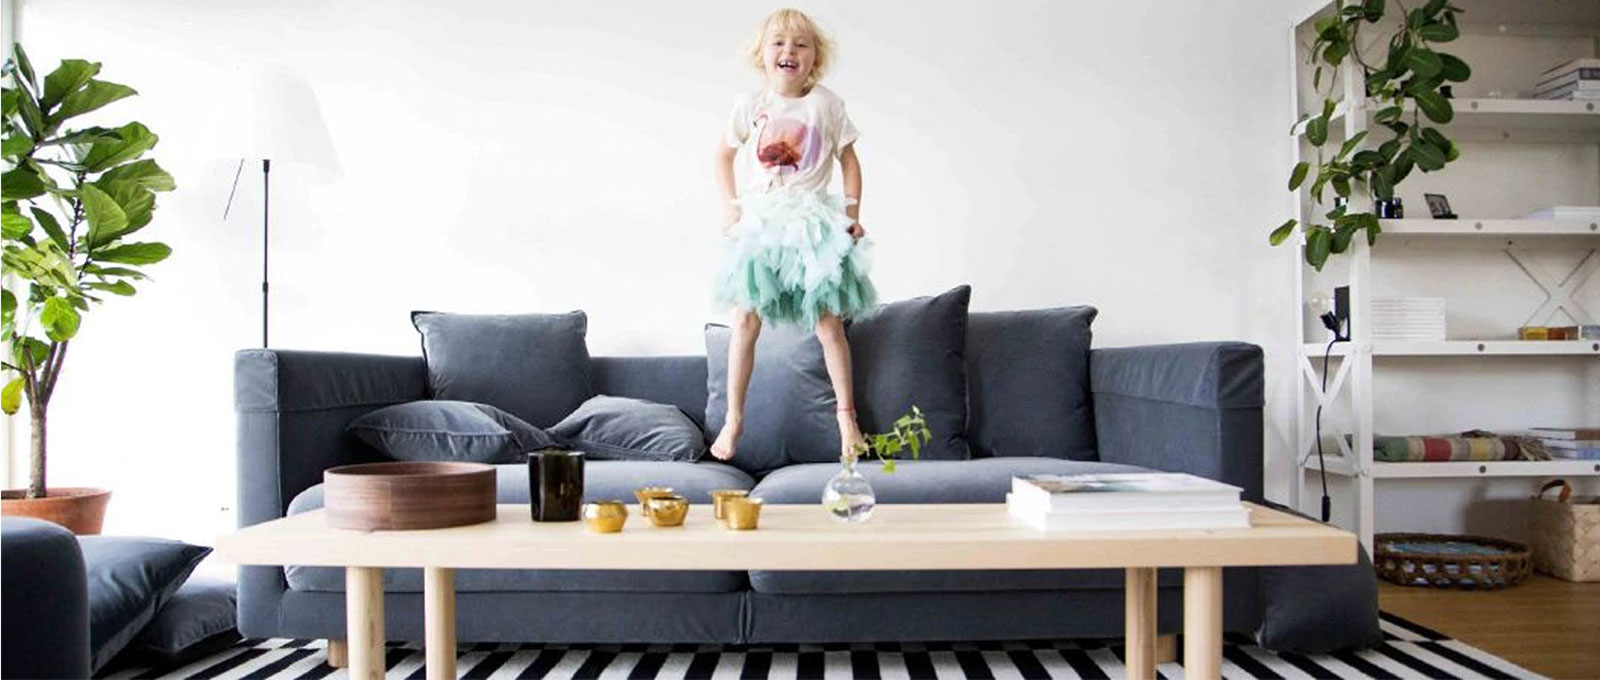 child jumping in sofa